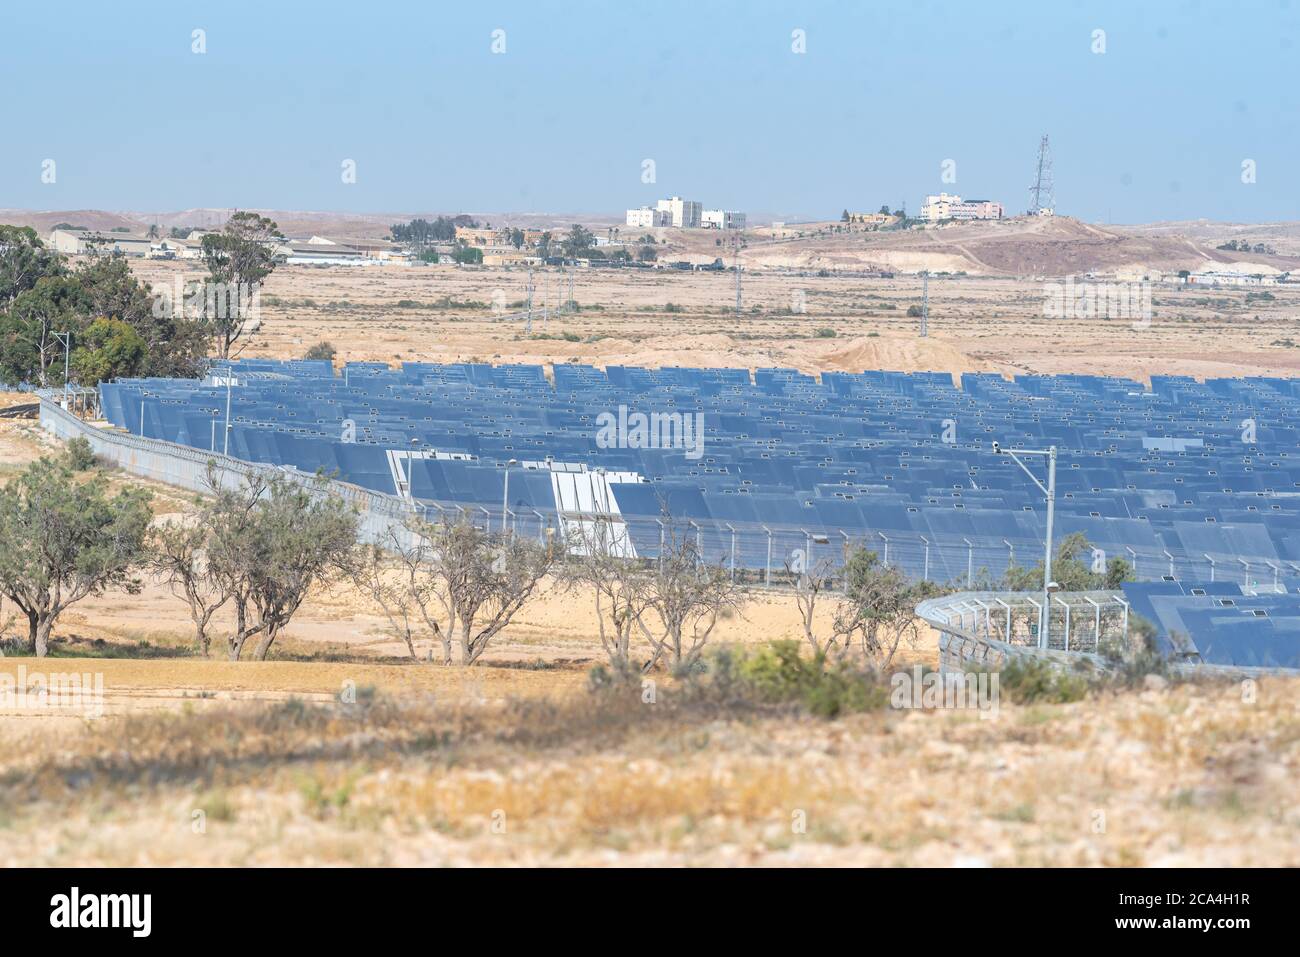 the mirror array at the Ashalim power station is a solar thermal power station in the Negev desert near the kibbutz of Ashalim, in Israel. The station Stock Photo